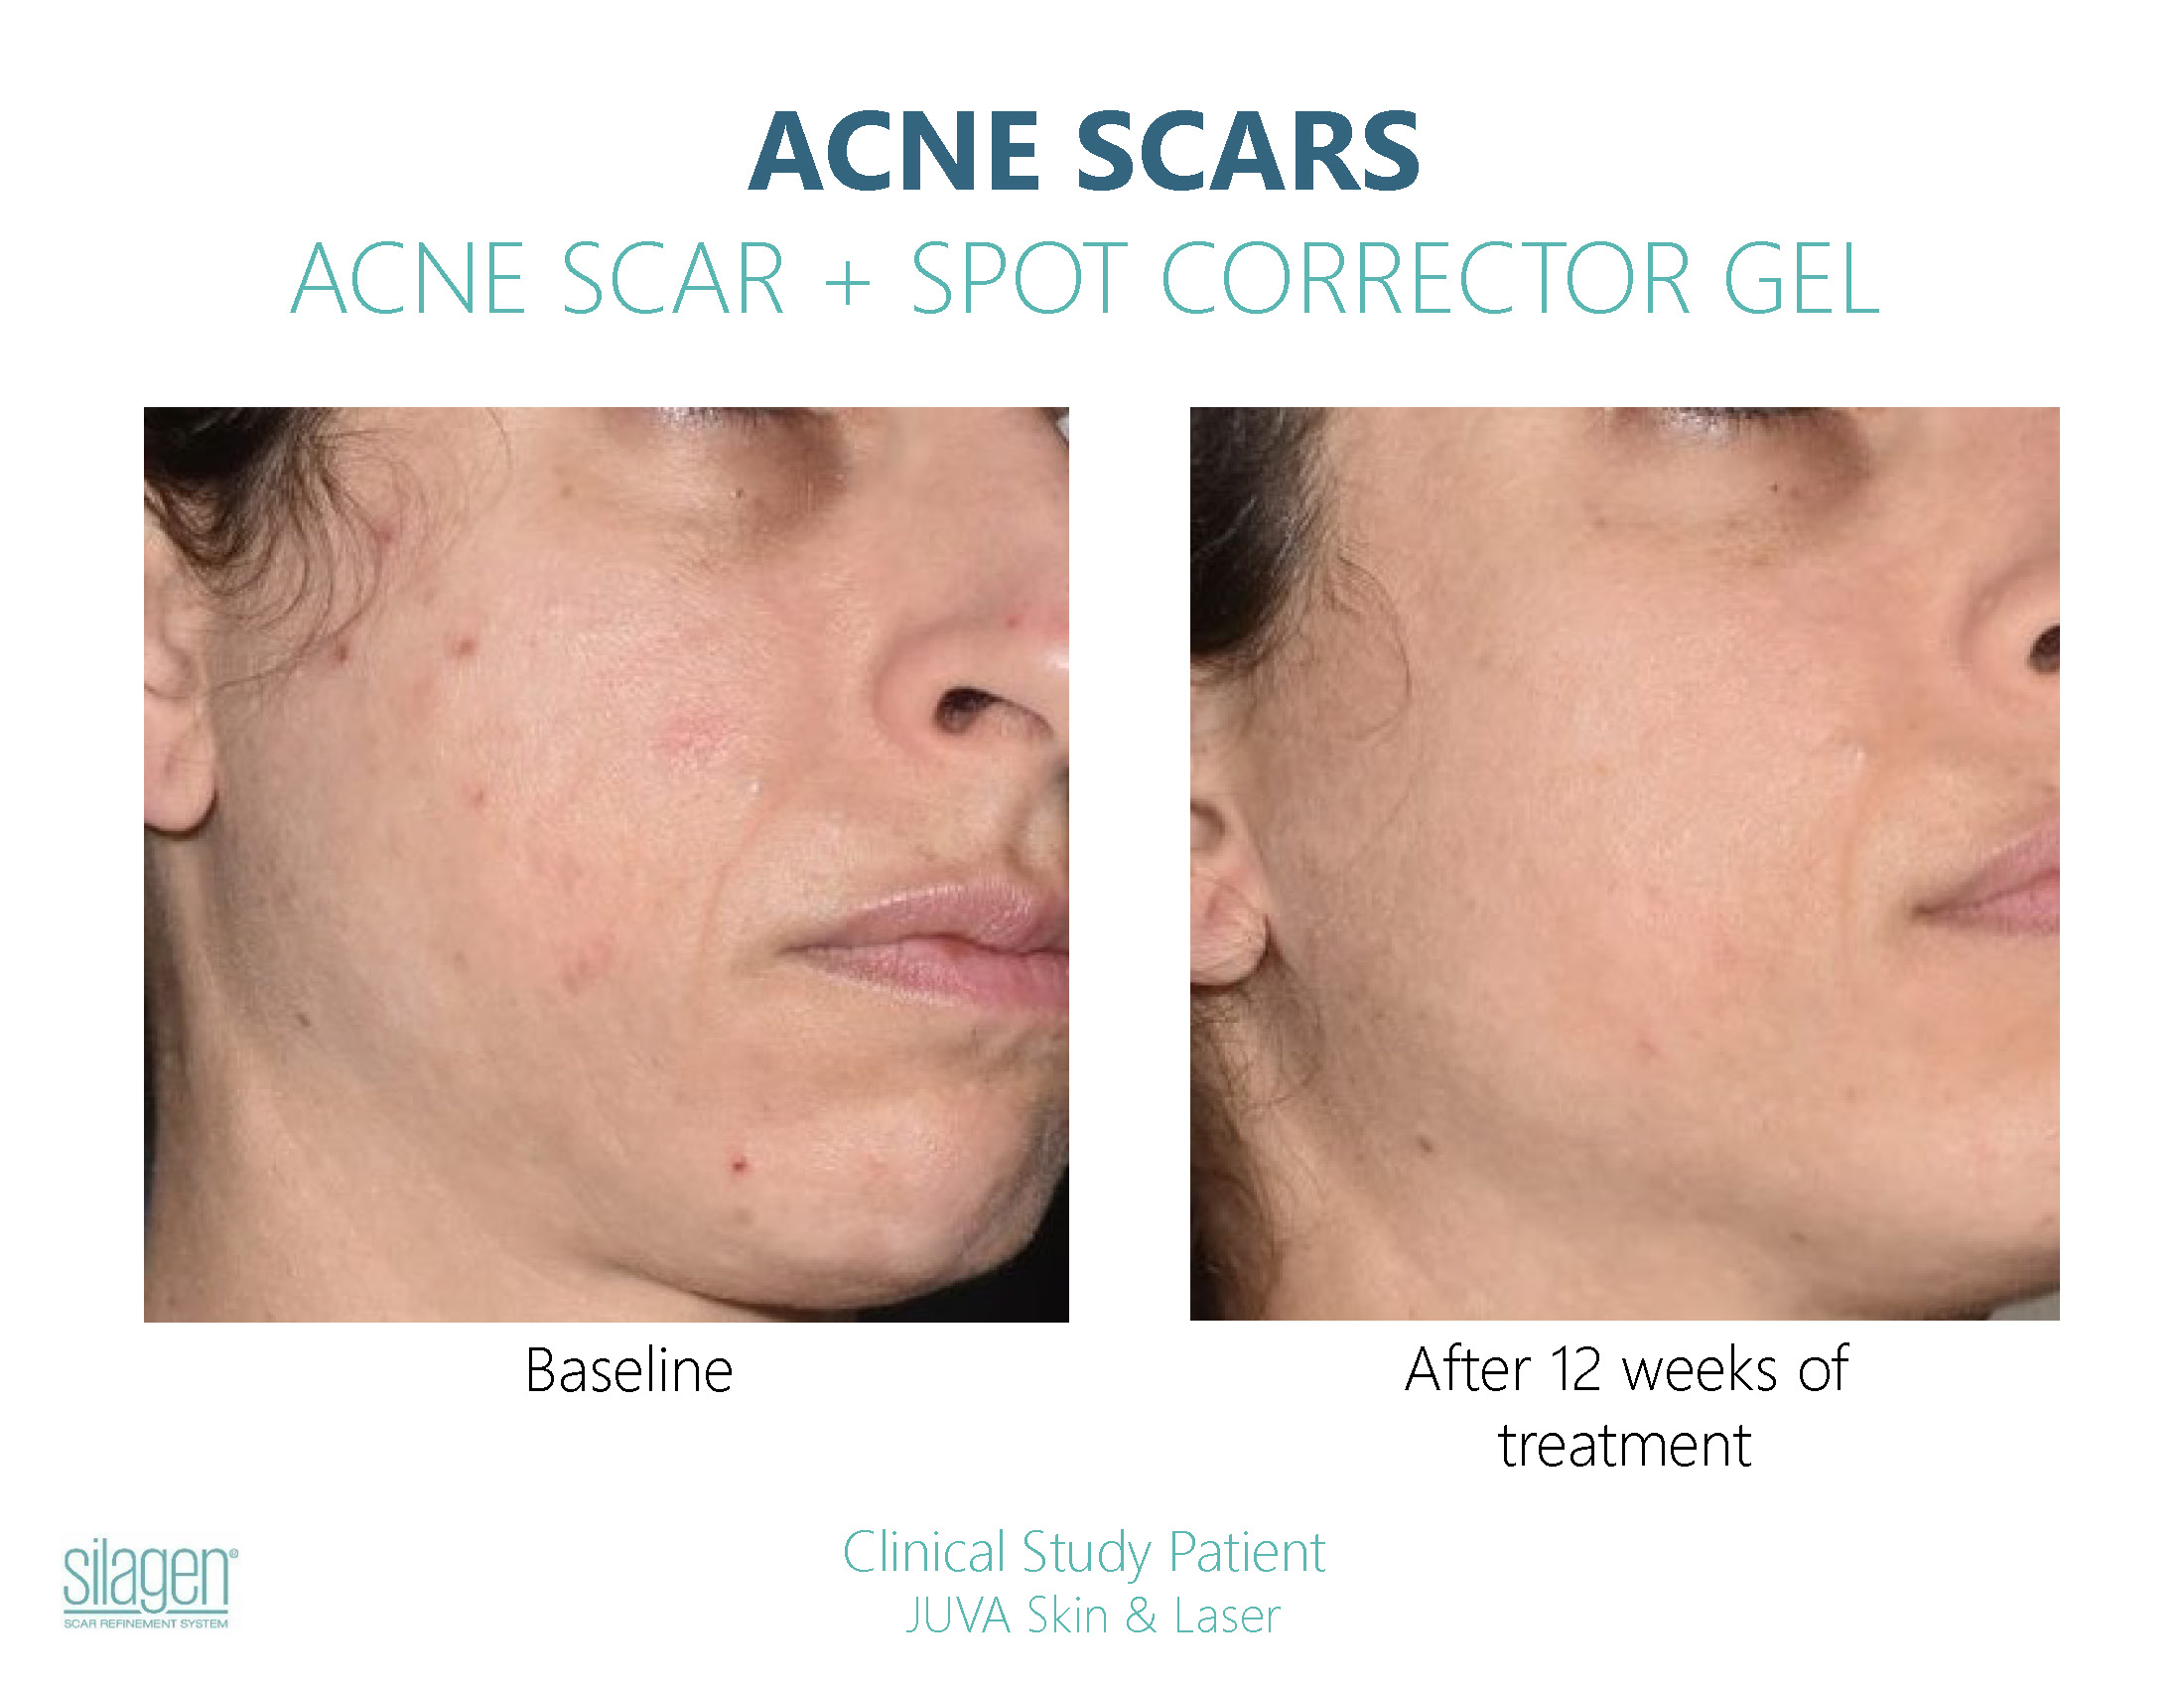 Silagen Acne Scar Before After Photos_Page_3